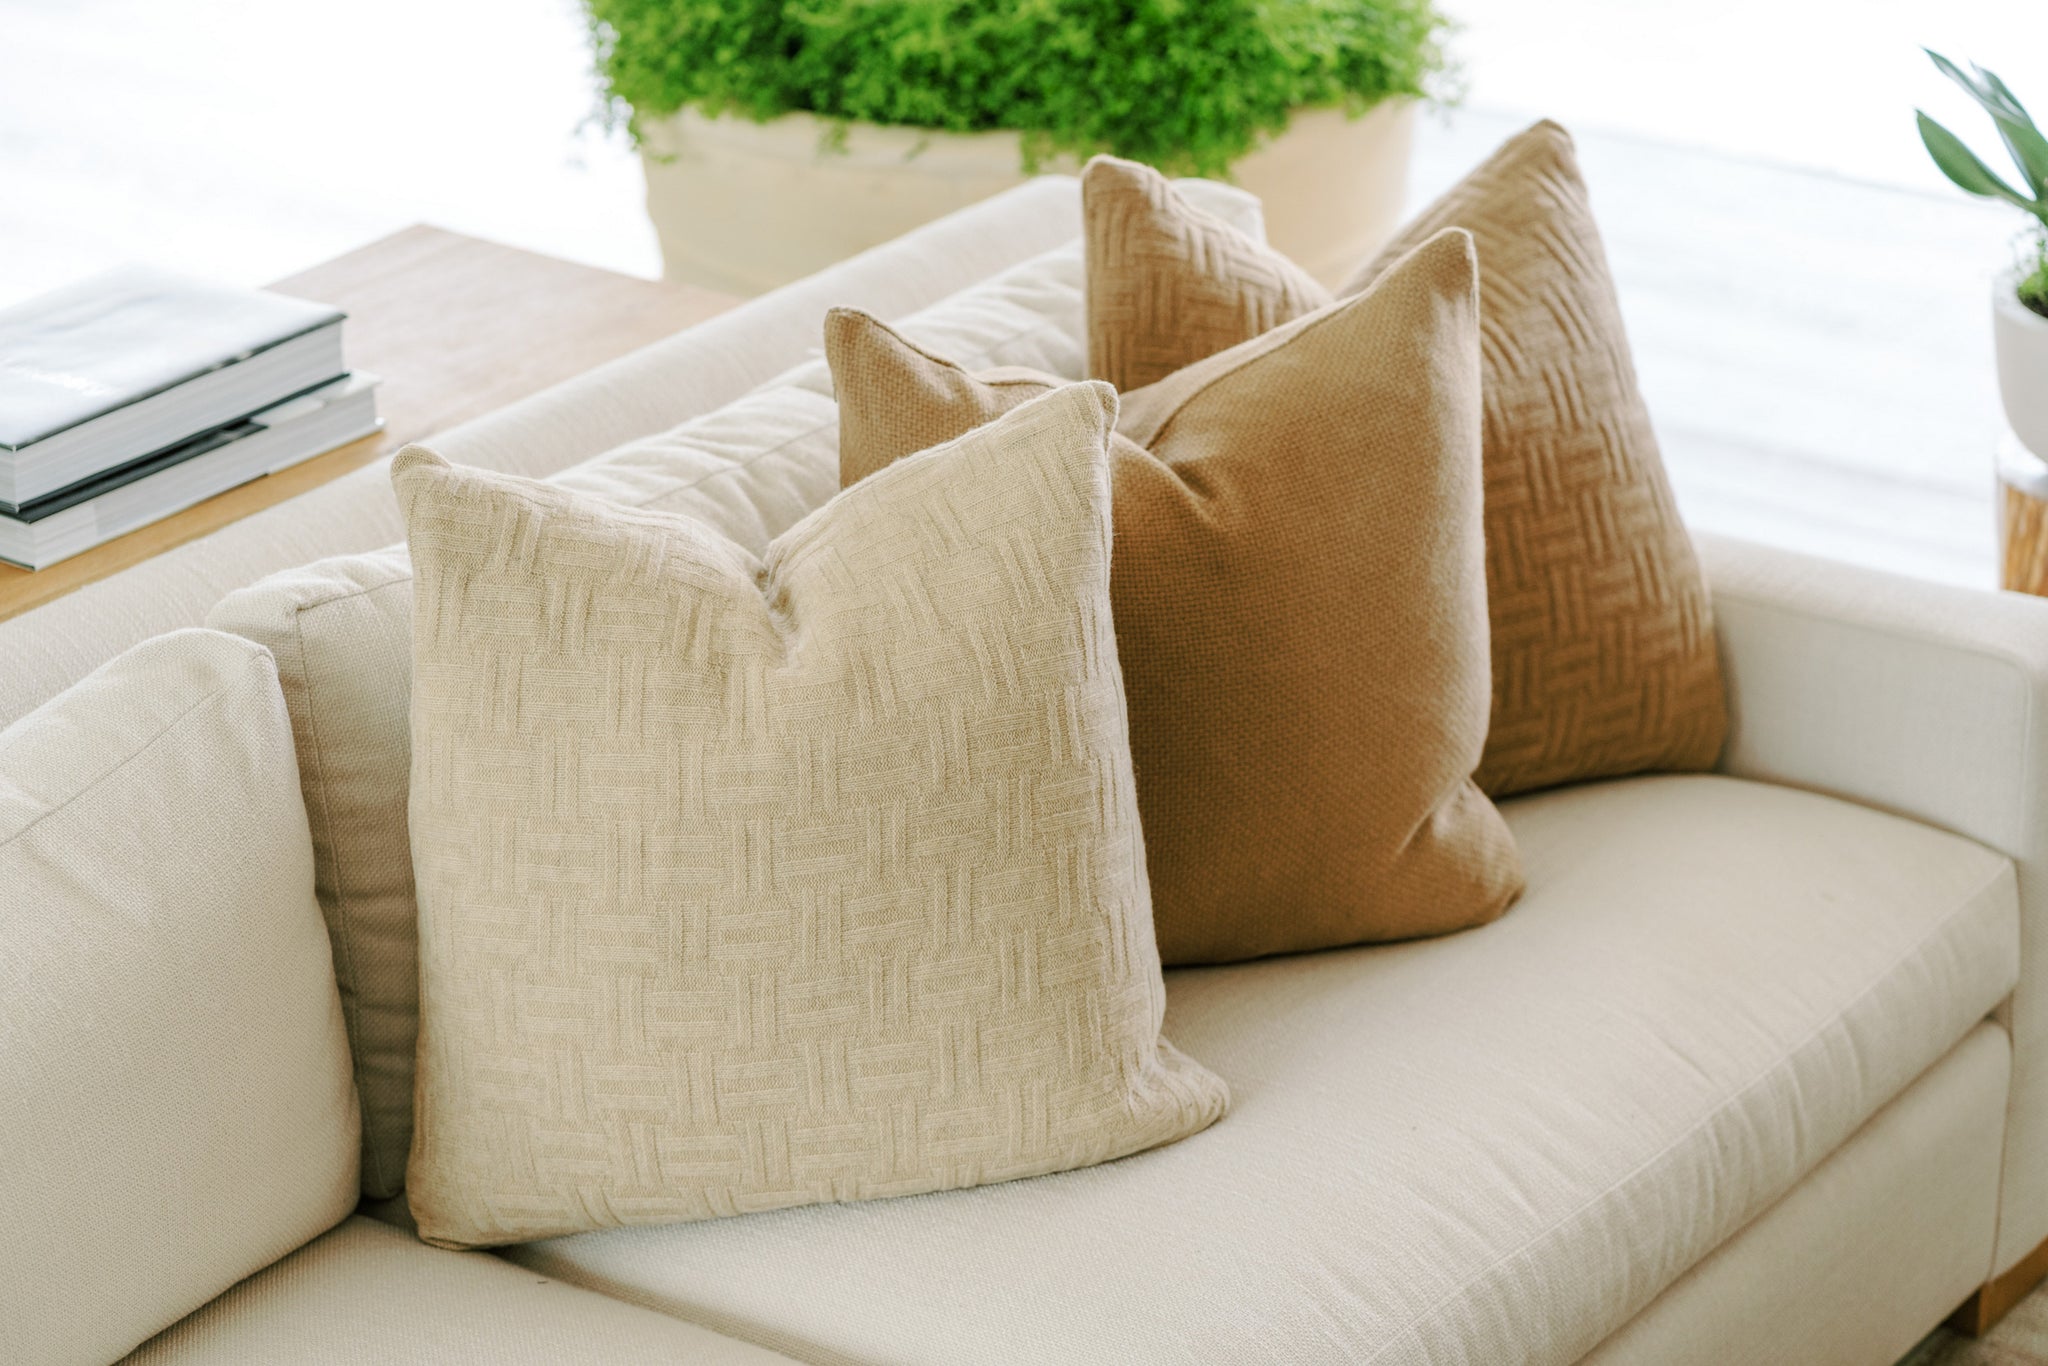 Warm, earthy-colored decorative pillows adding rustic elegance